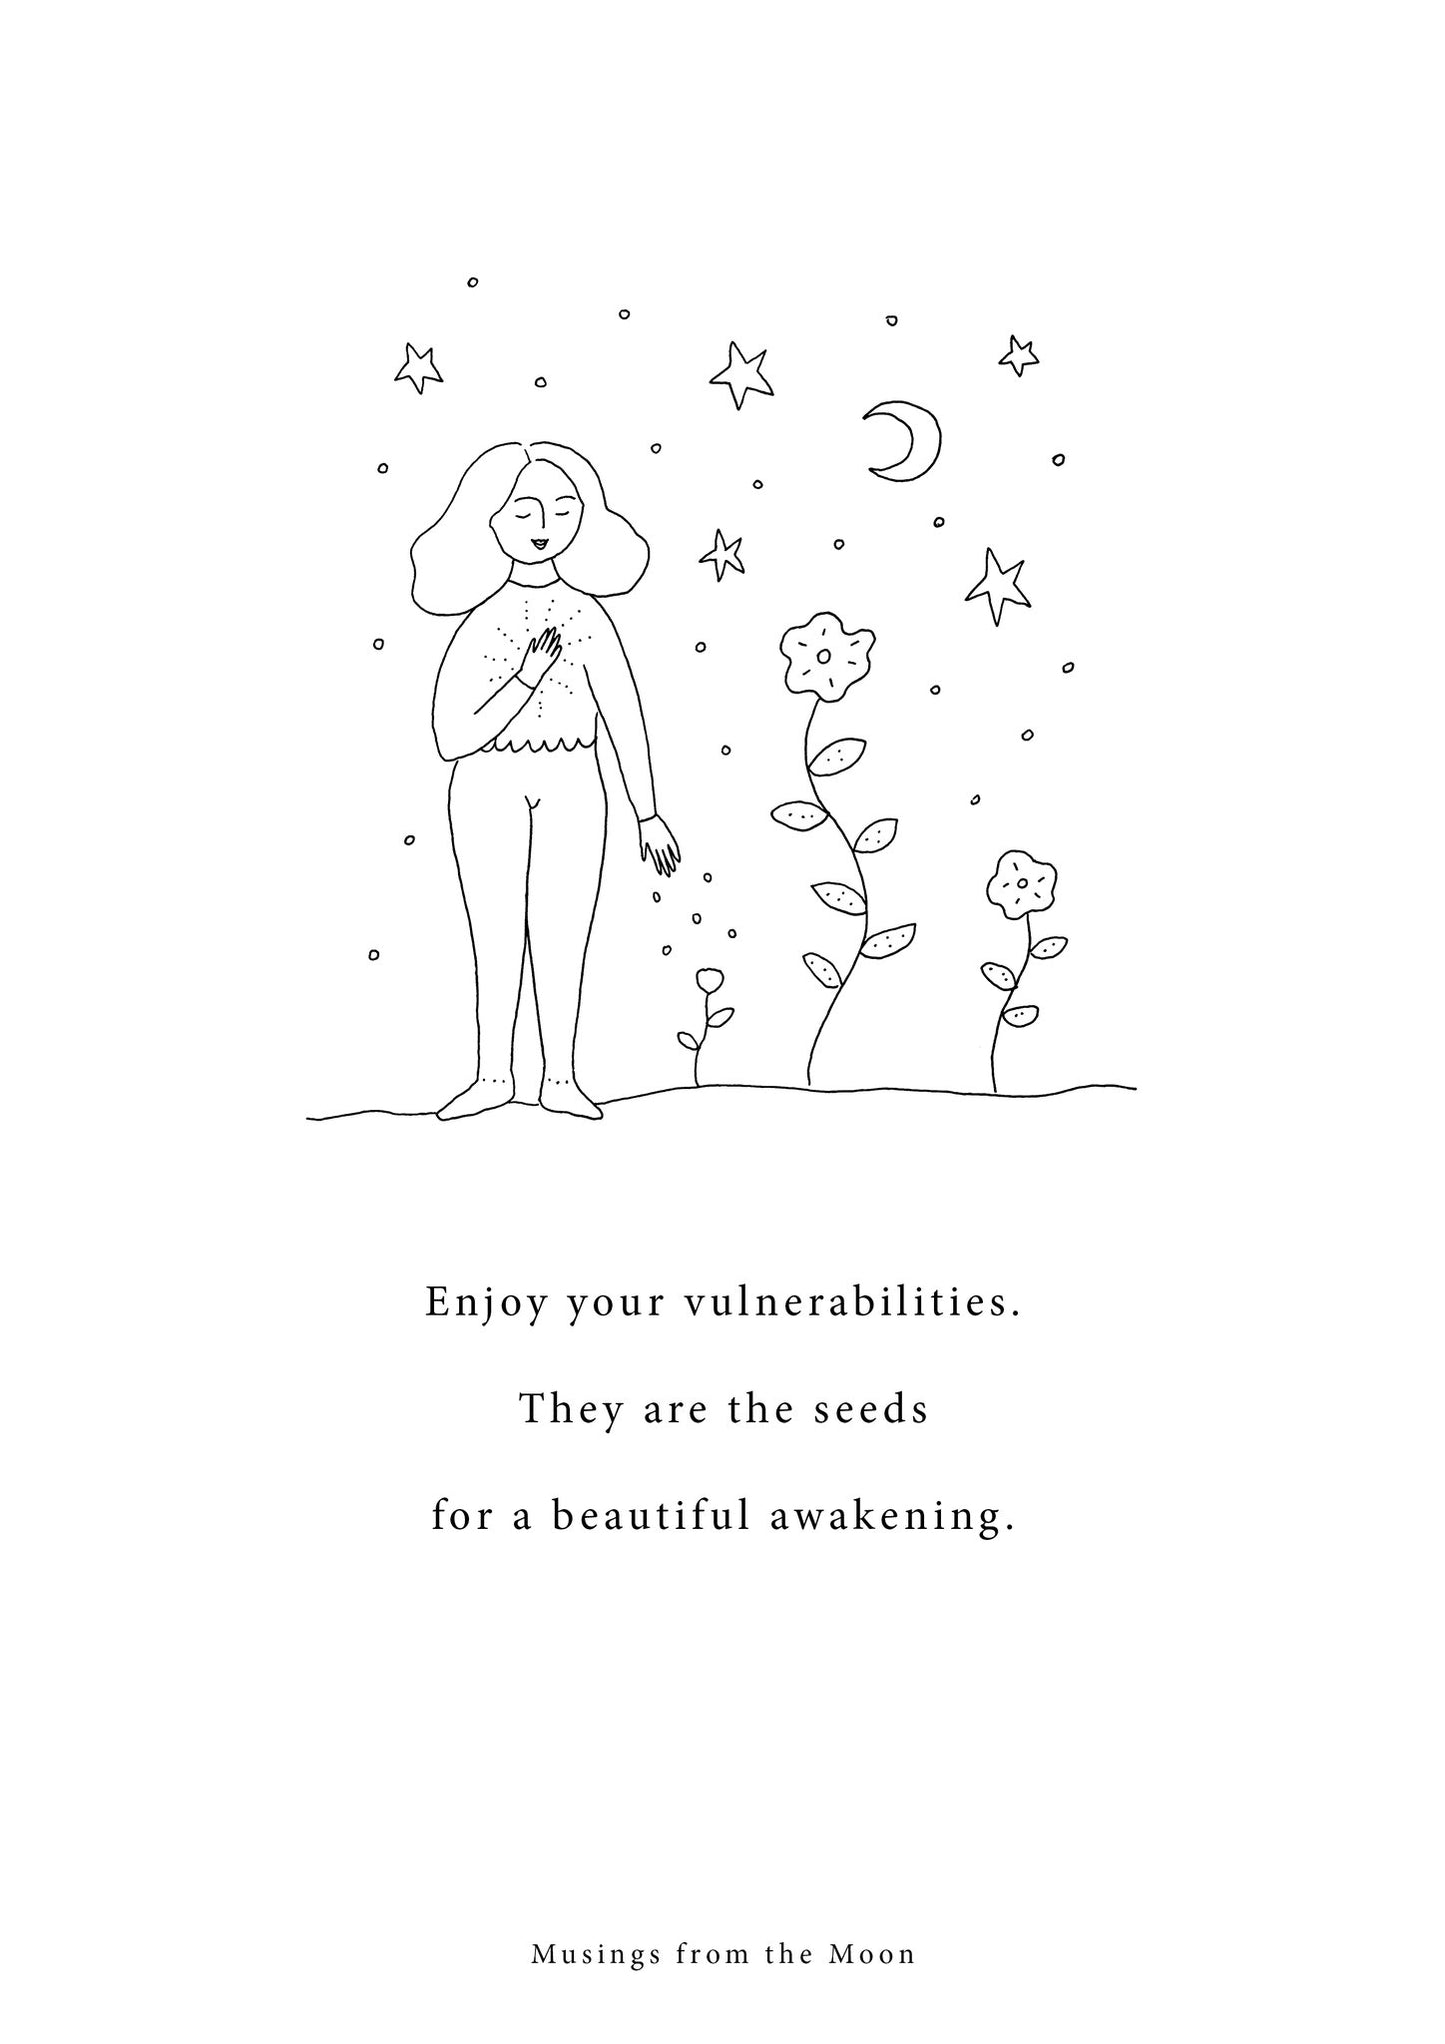 Load image into Gallery viewer, Musings from The Moon- Enjoy your Vulnerabilities Print  - A4 Print With Gold Leaf Detail
